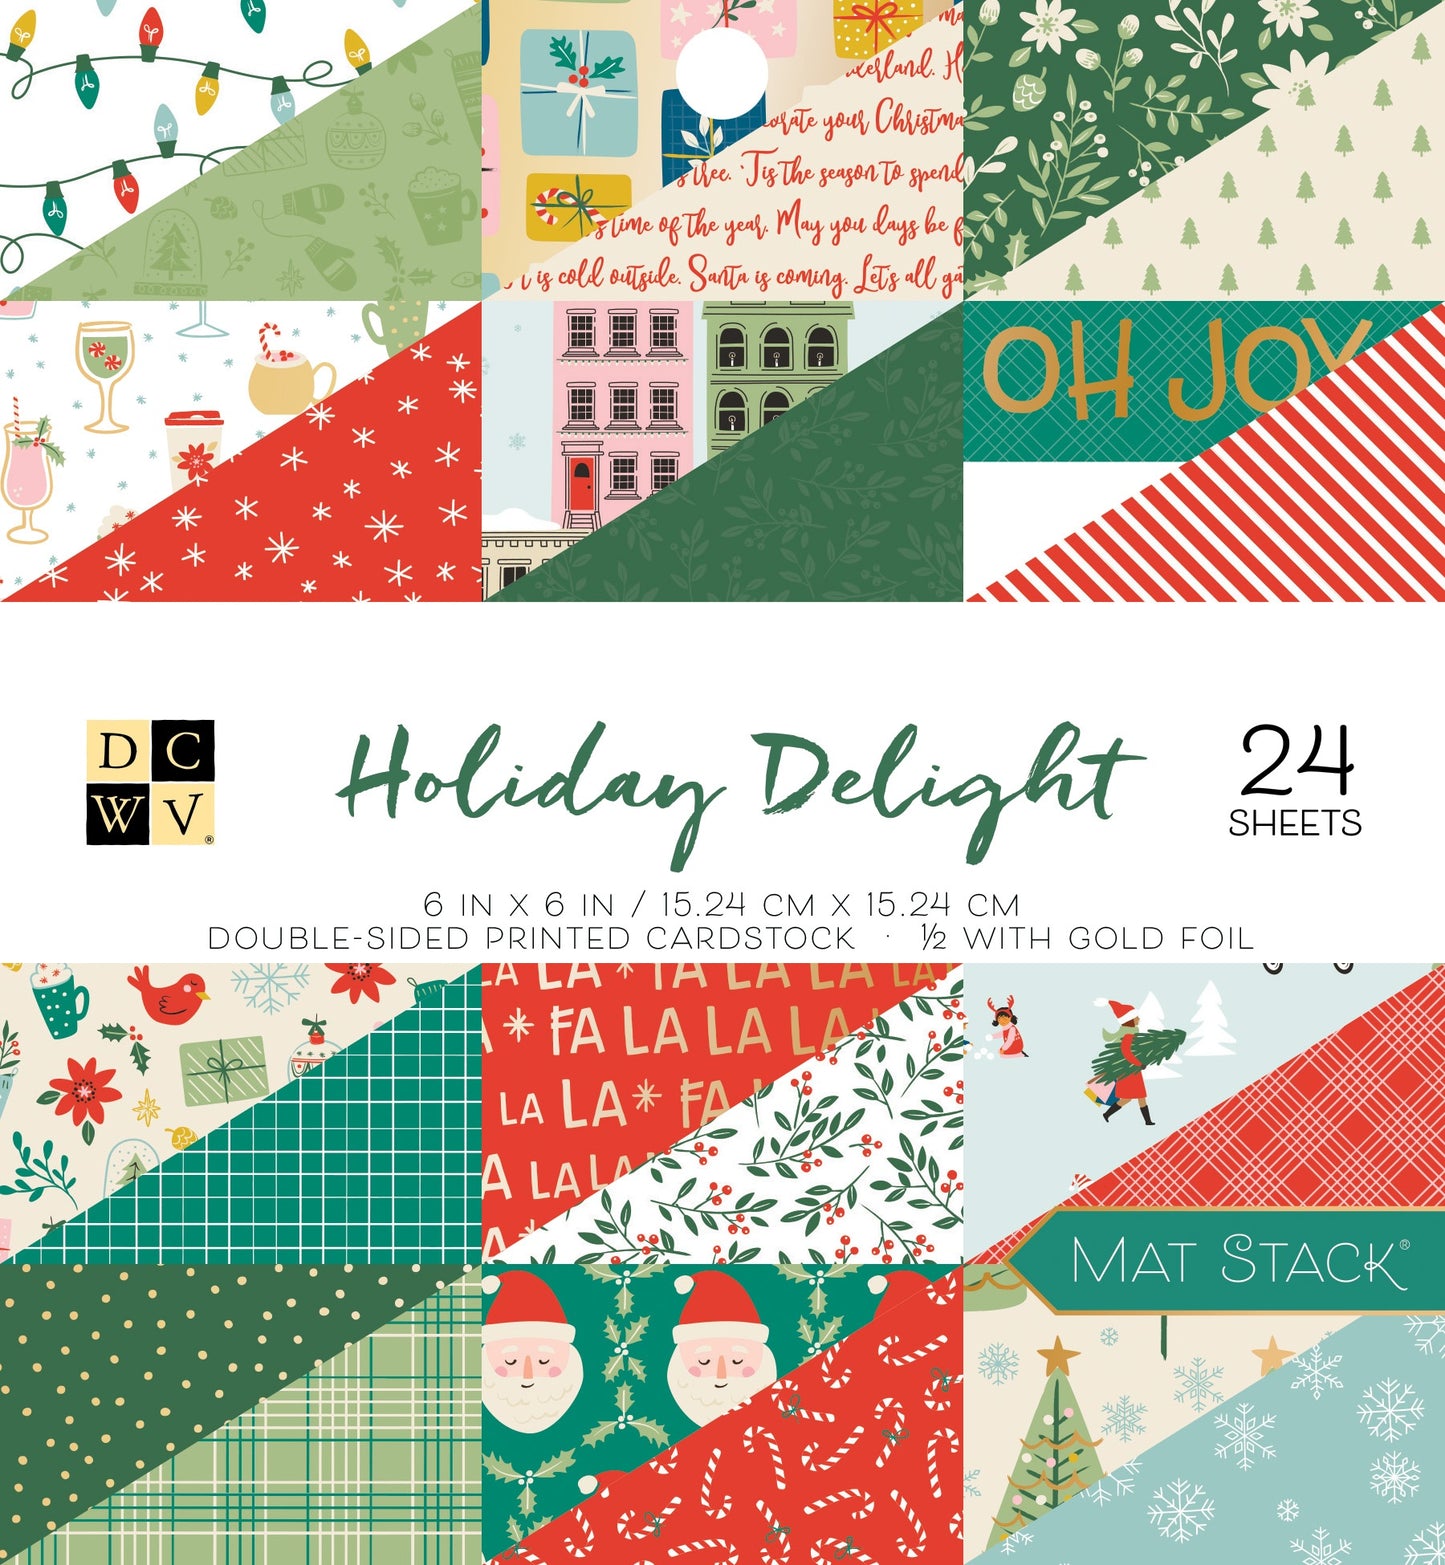 DCWV Double-Sided Cardstock Stack 6"X6" 24/Pkg-Holiday Delight, W/Gold Foil